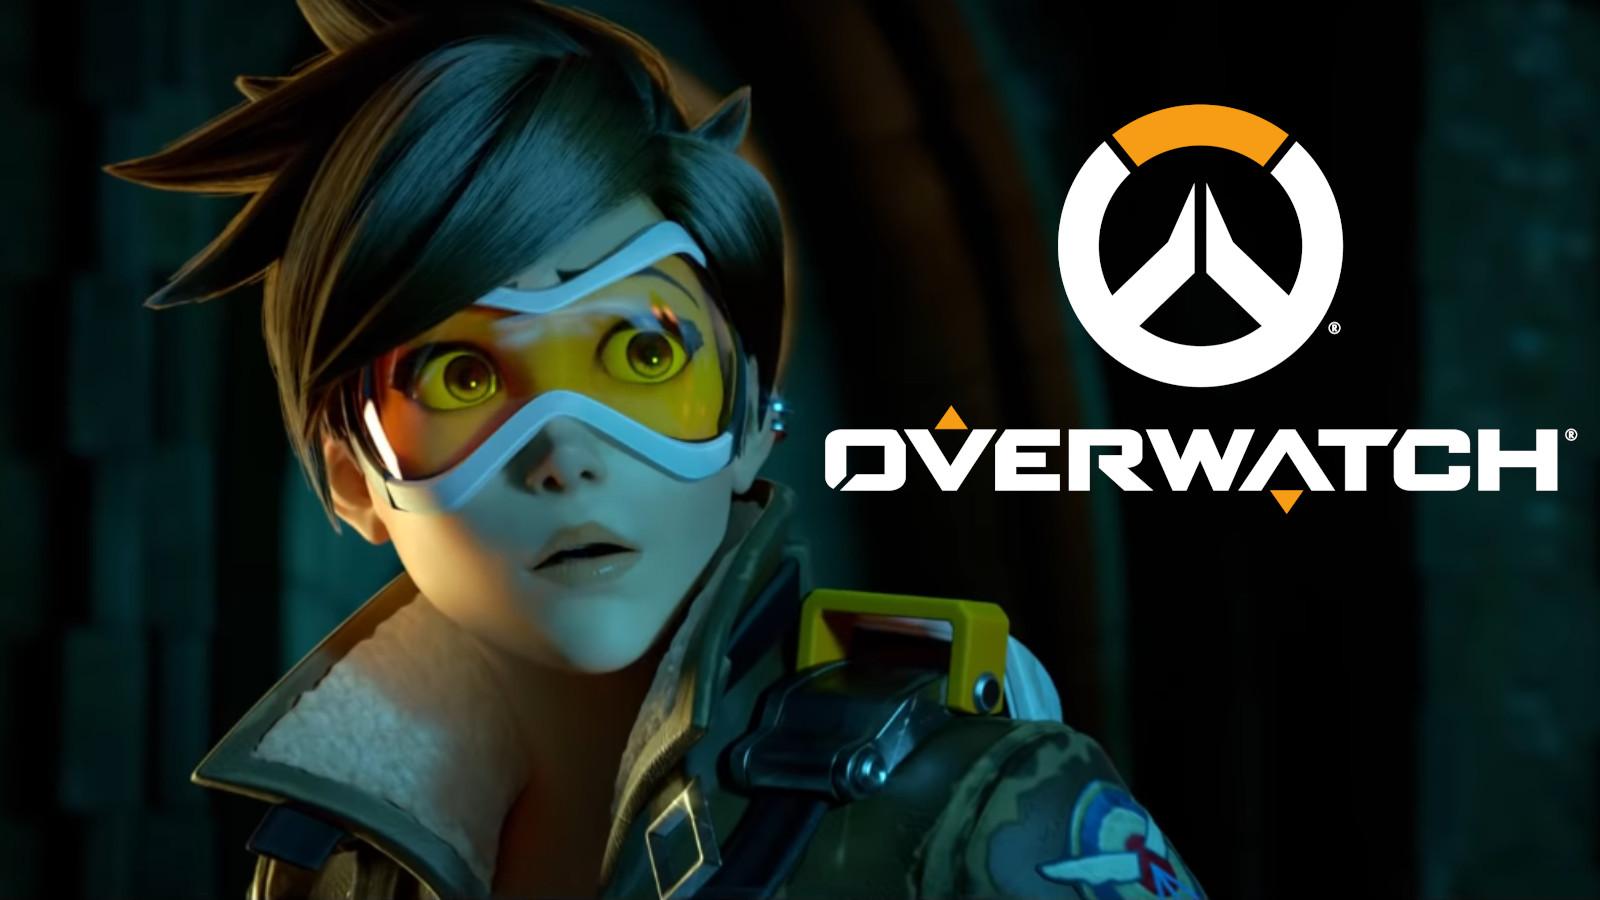 Tracer stares off looking concerned